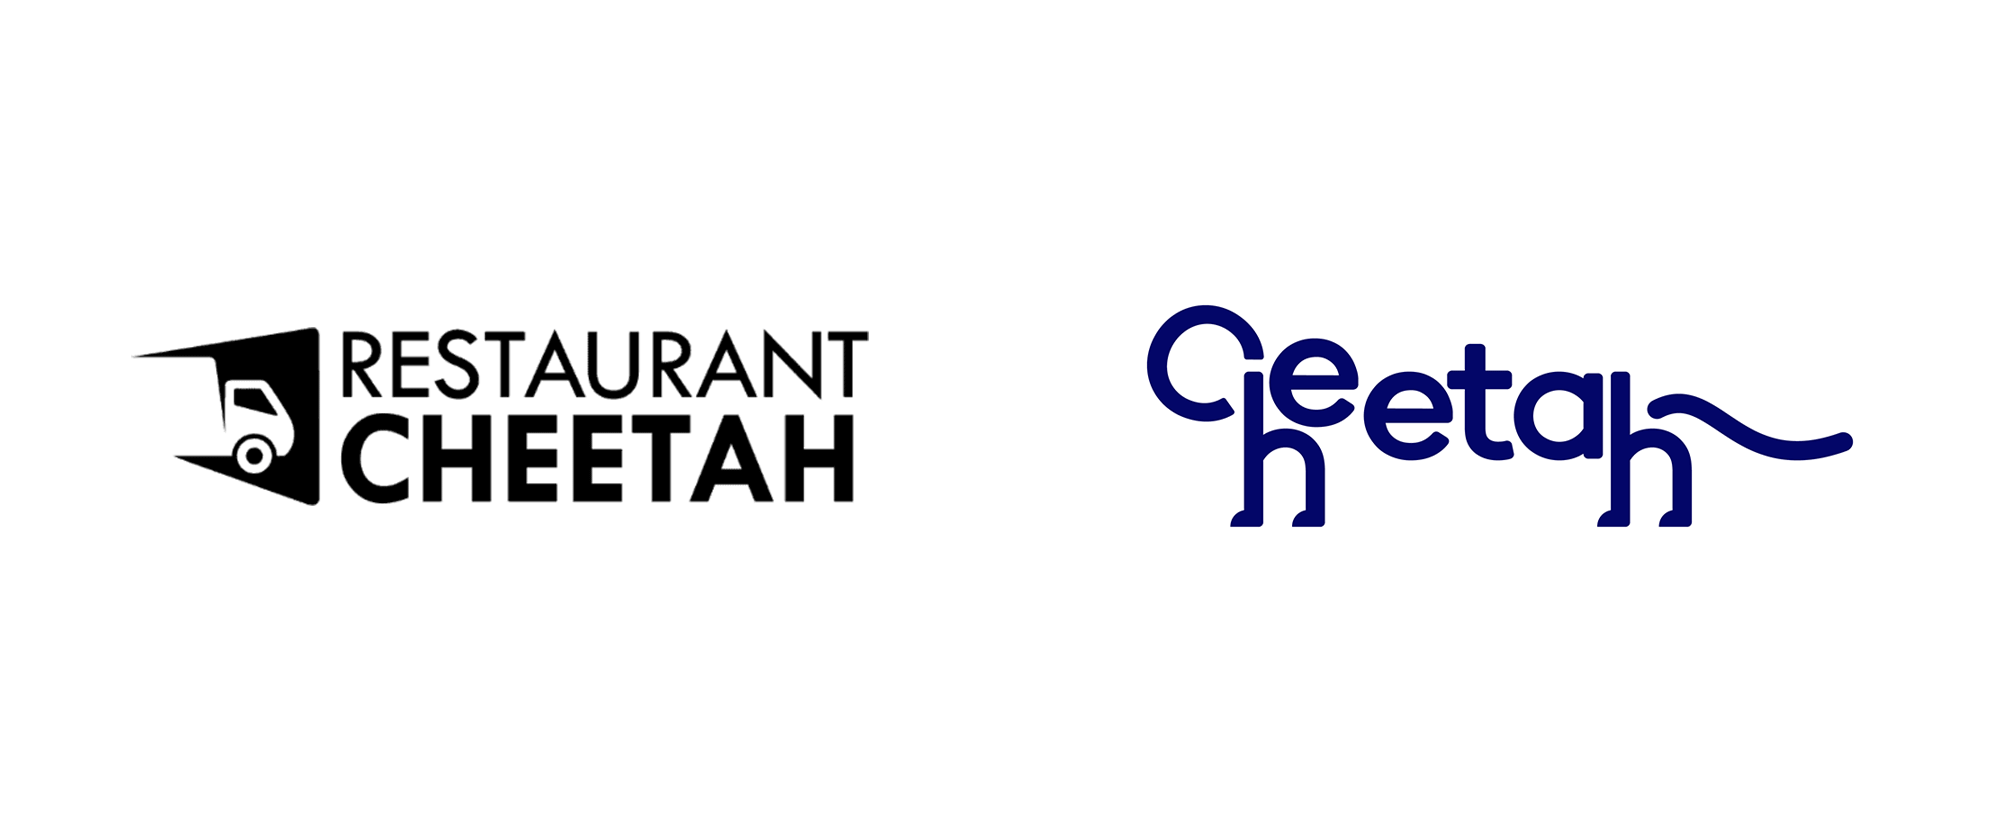 At Logo - Brand New: New Logo and Identity for Cheetah